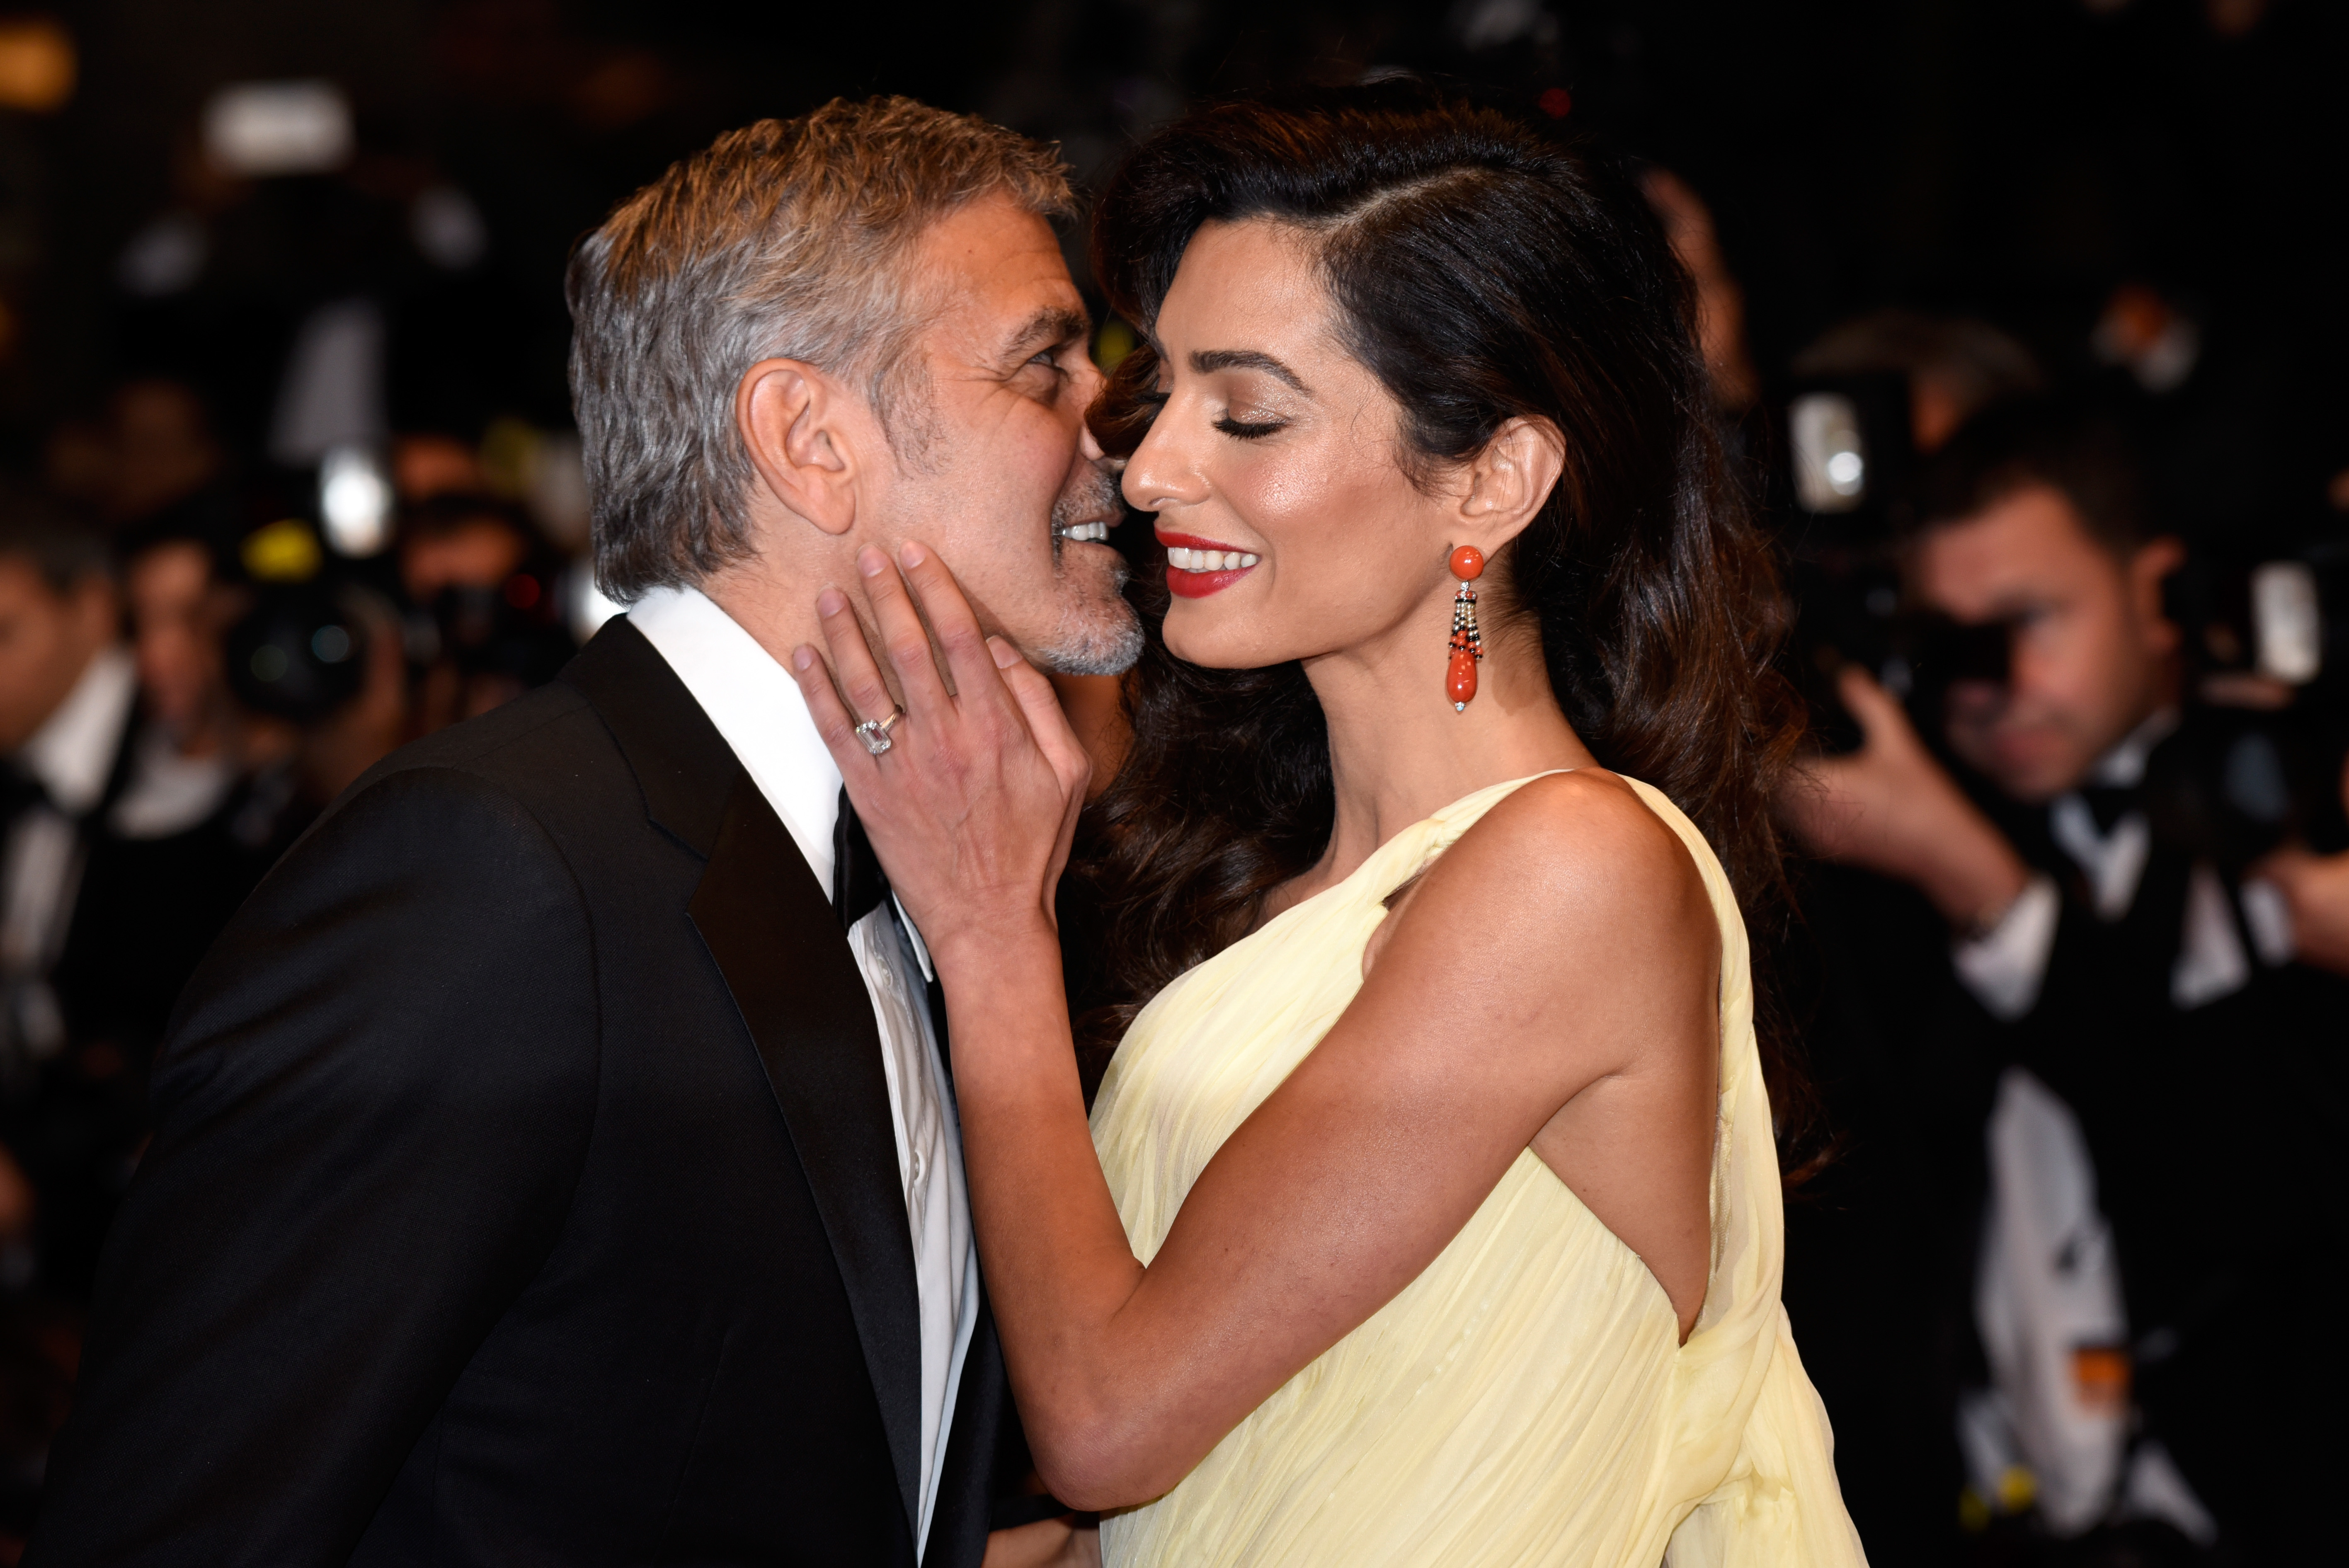 George Clooney and his wife Amal Clooney attend the premiere of "Money Monster," 2016 | Source: Getty Images